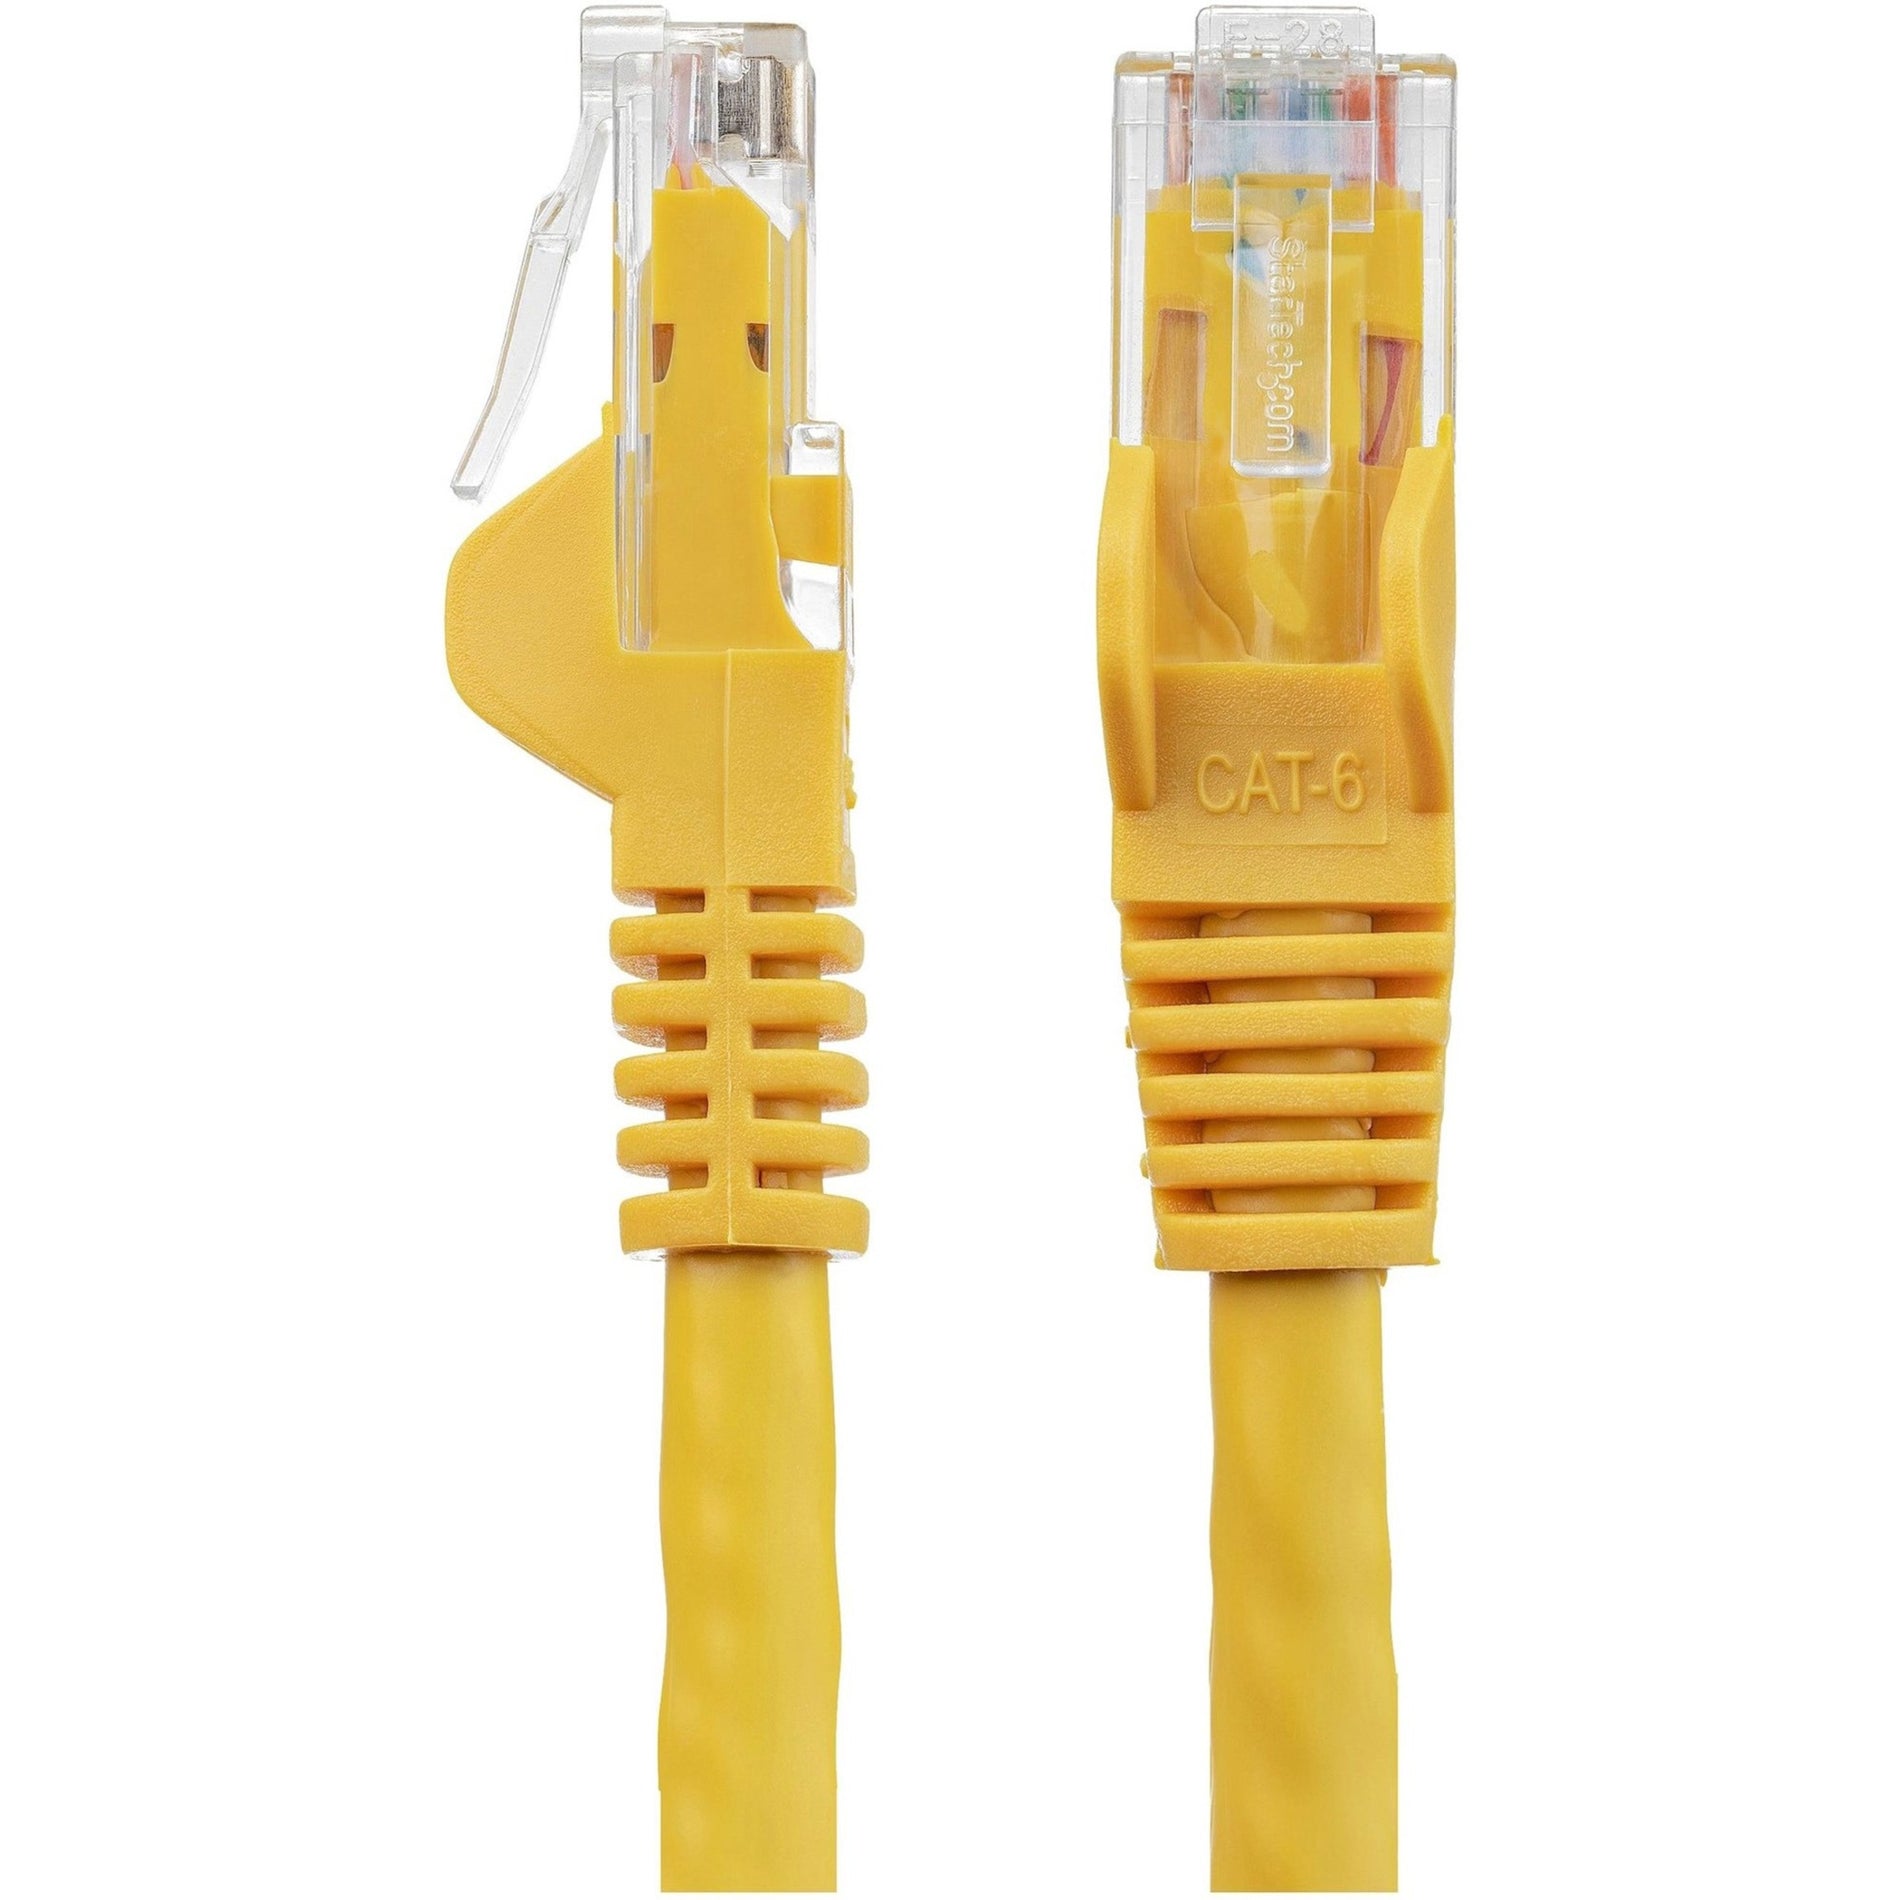 StarTech.com N6PATCH8YL Cat6 Patch Cable, 8 ft Yellow Ethernet Cable with Snagless RJ45 Connectors